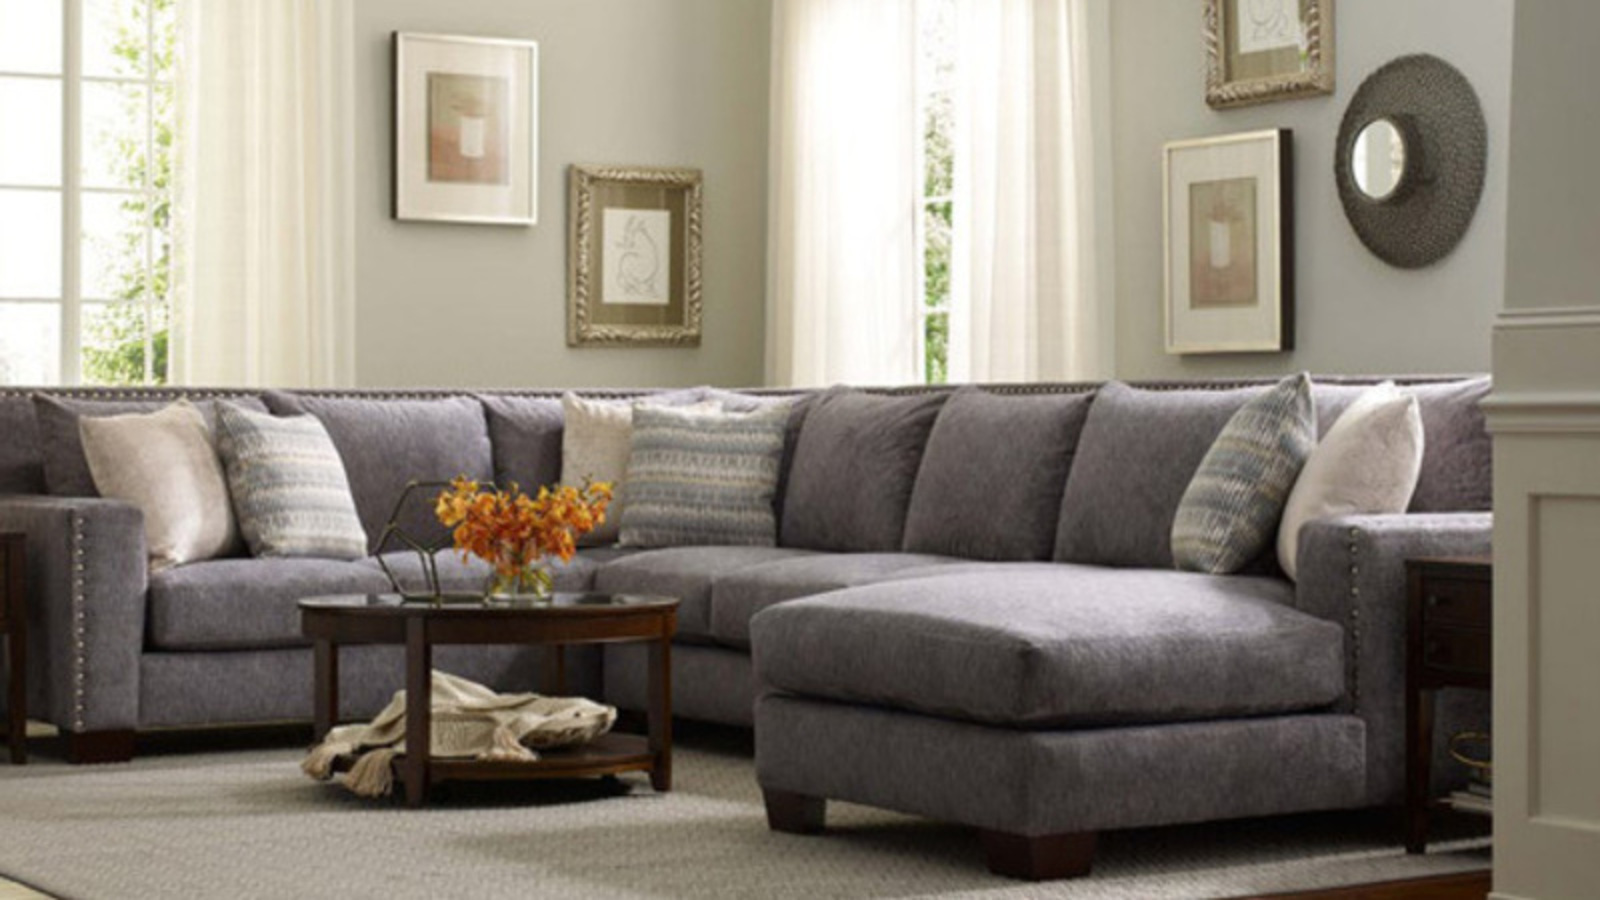 How To Buy a Sofa - Featured